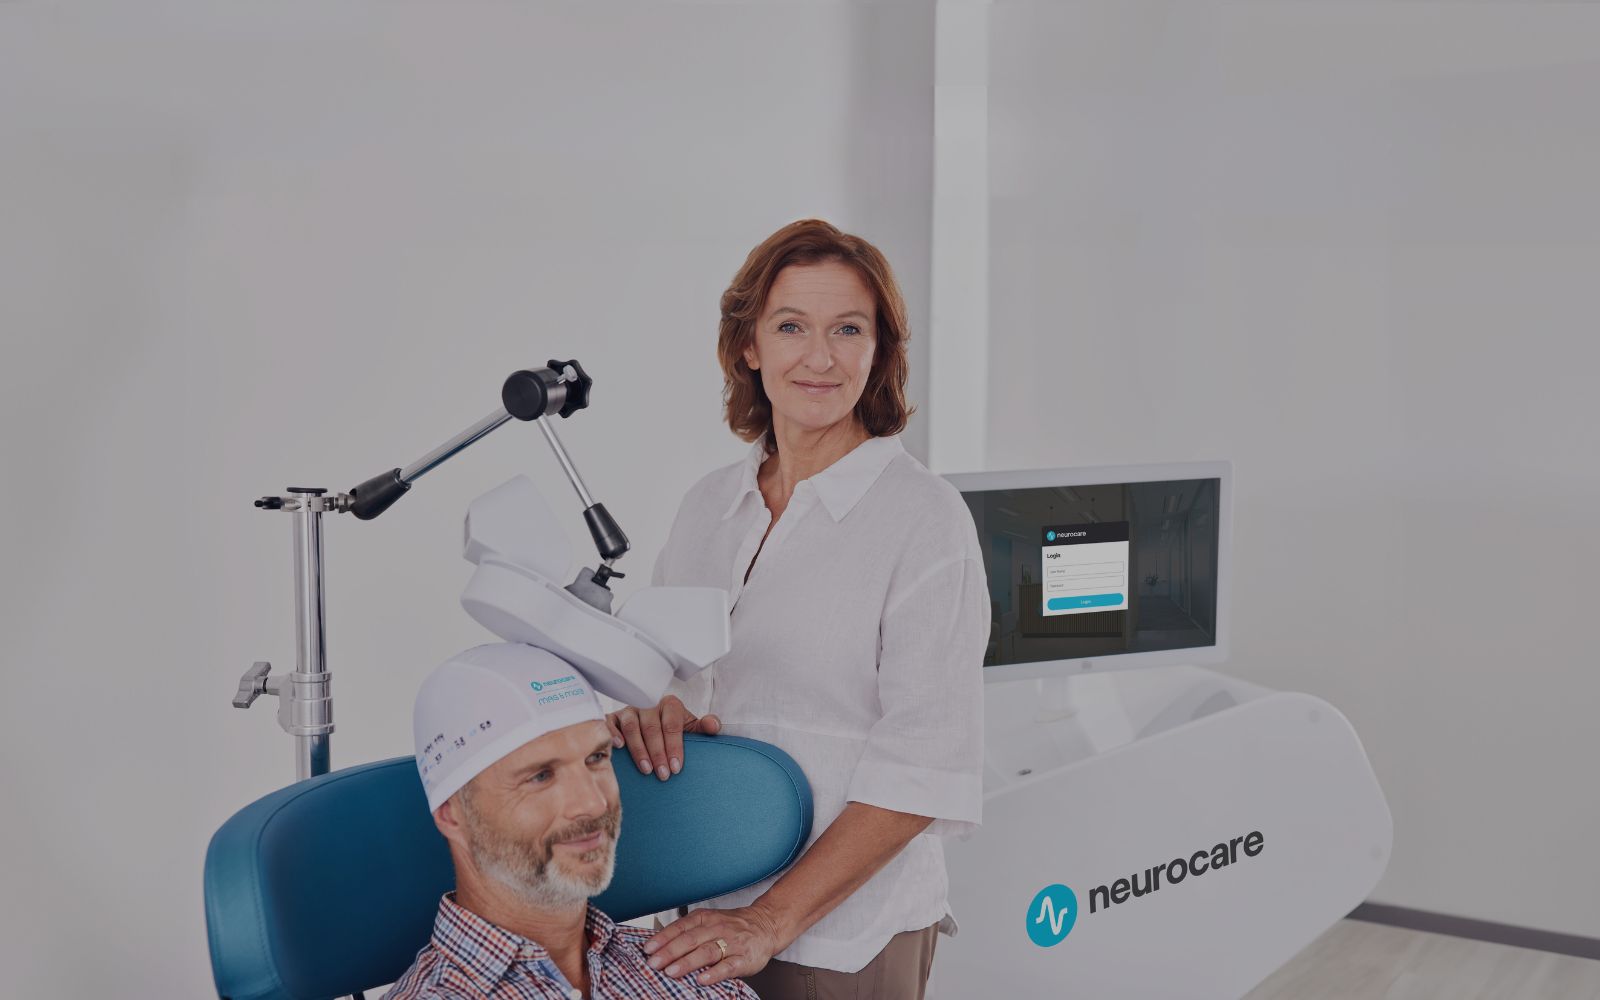 neurocare-clinician-helping-tms-patient-with-apollo-tms-therapy-system_hm (3)